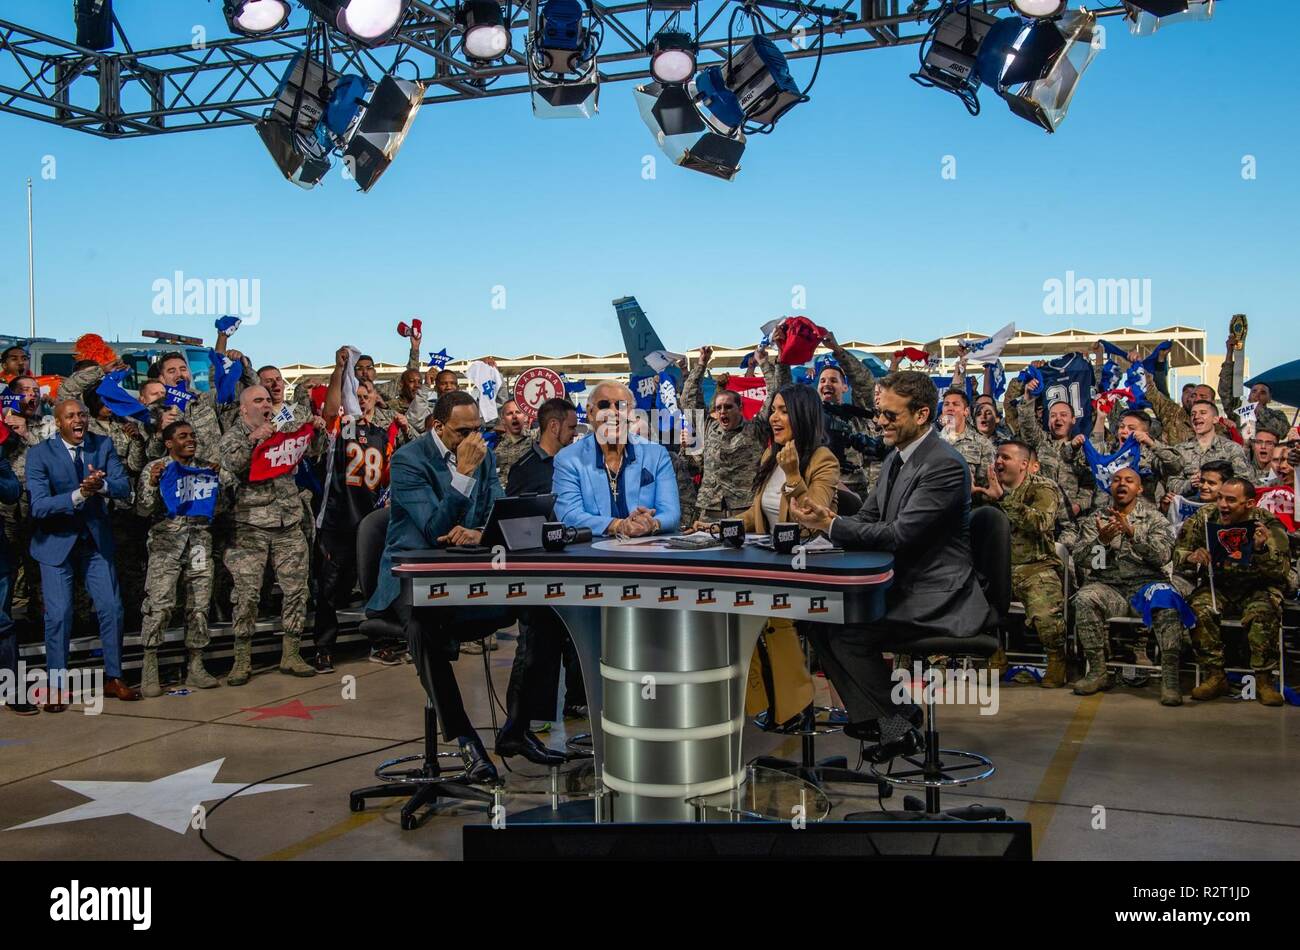 ESPN First Take hosts along with WWE Hall of Fame member “Nature Boy” Ric Flair discuss sports during a live show at Luke Air Force Base, Ariz., Nov. 9, 2018. Flair was a special guest on the show as part of the Veteran’s Day special show which honored military service members. Stock Photo